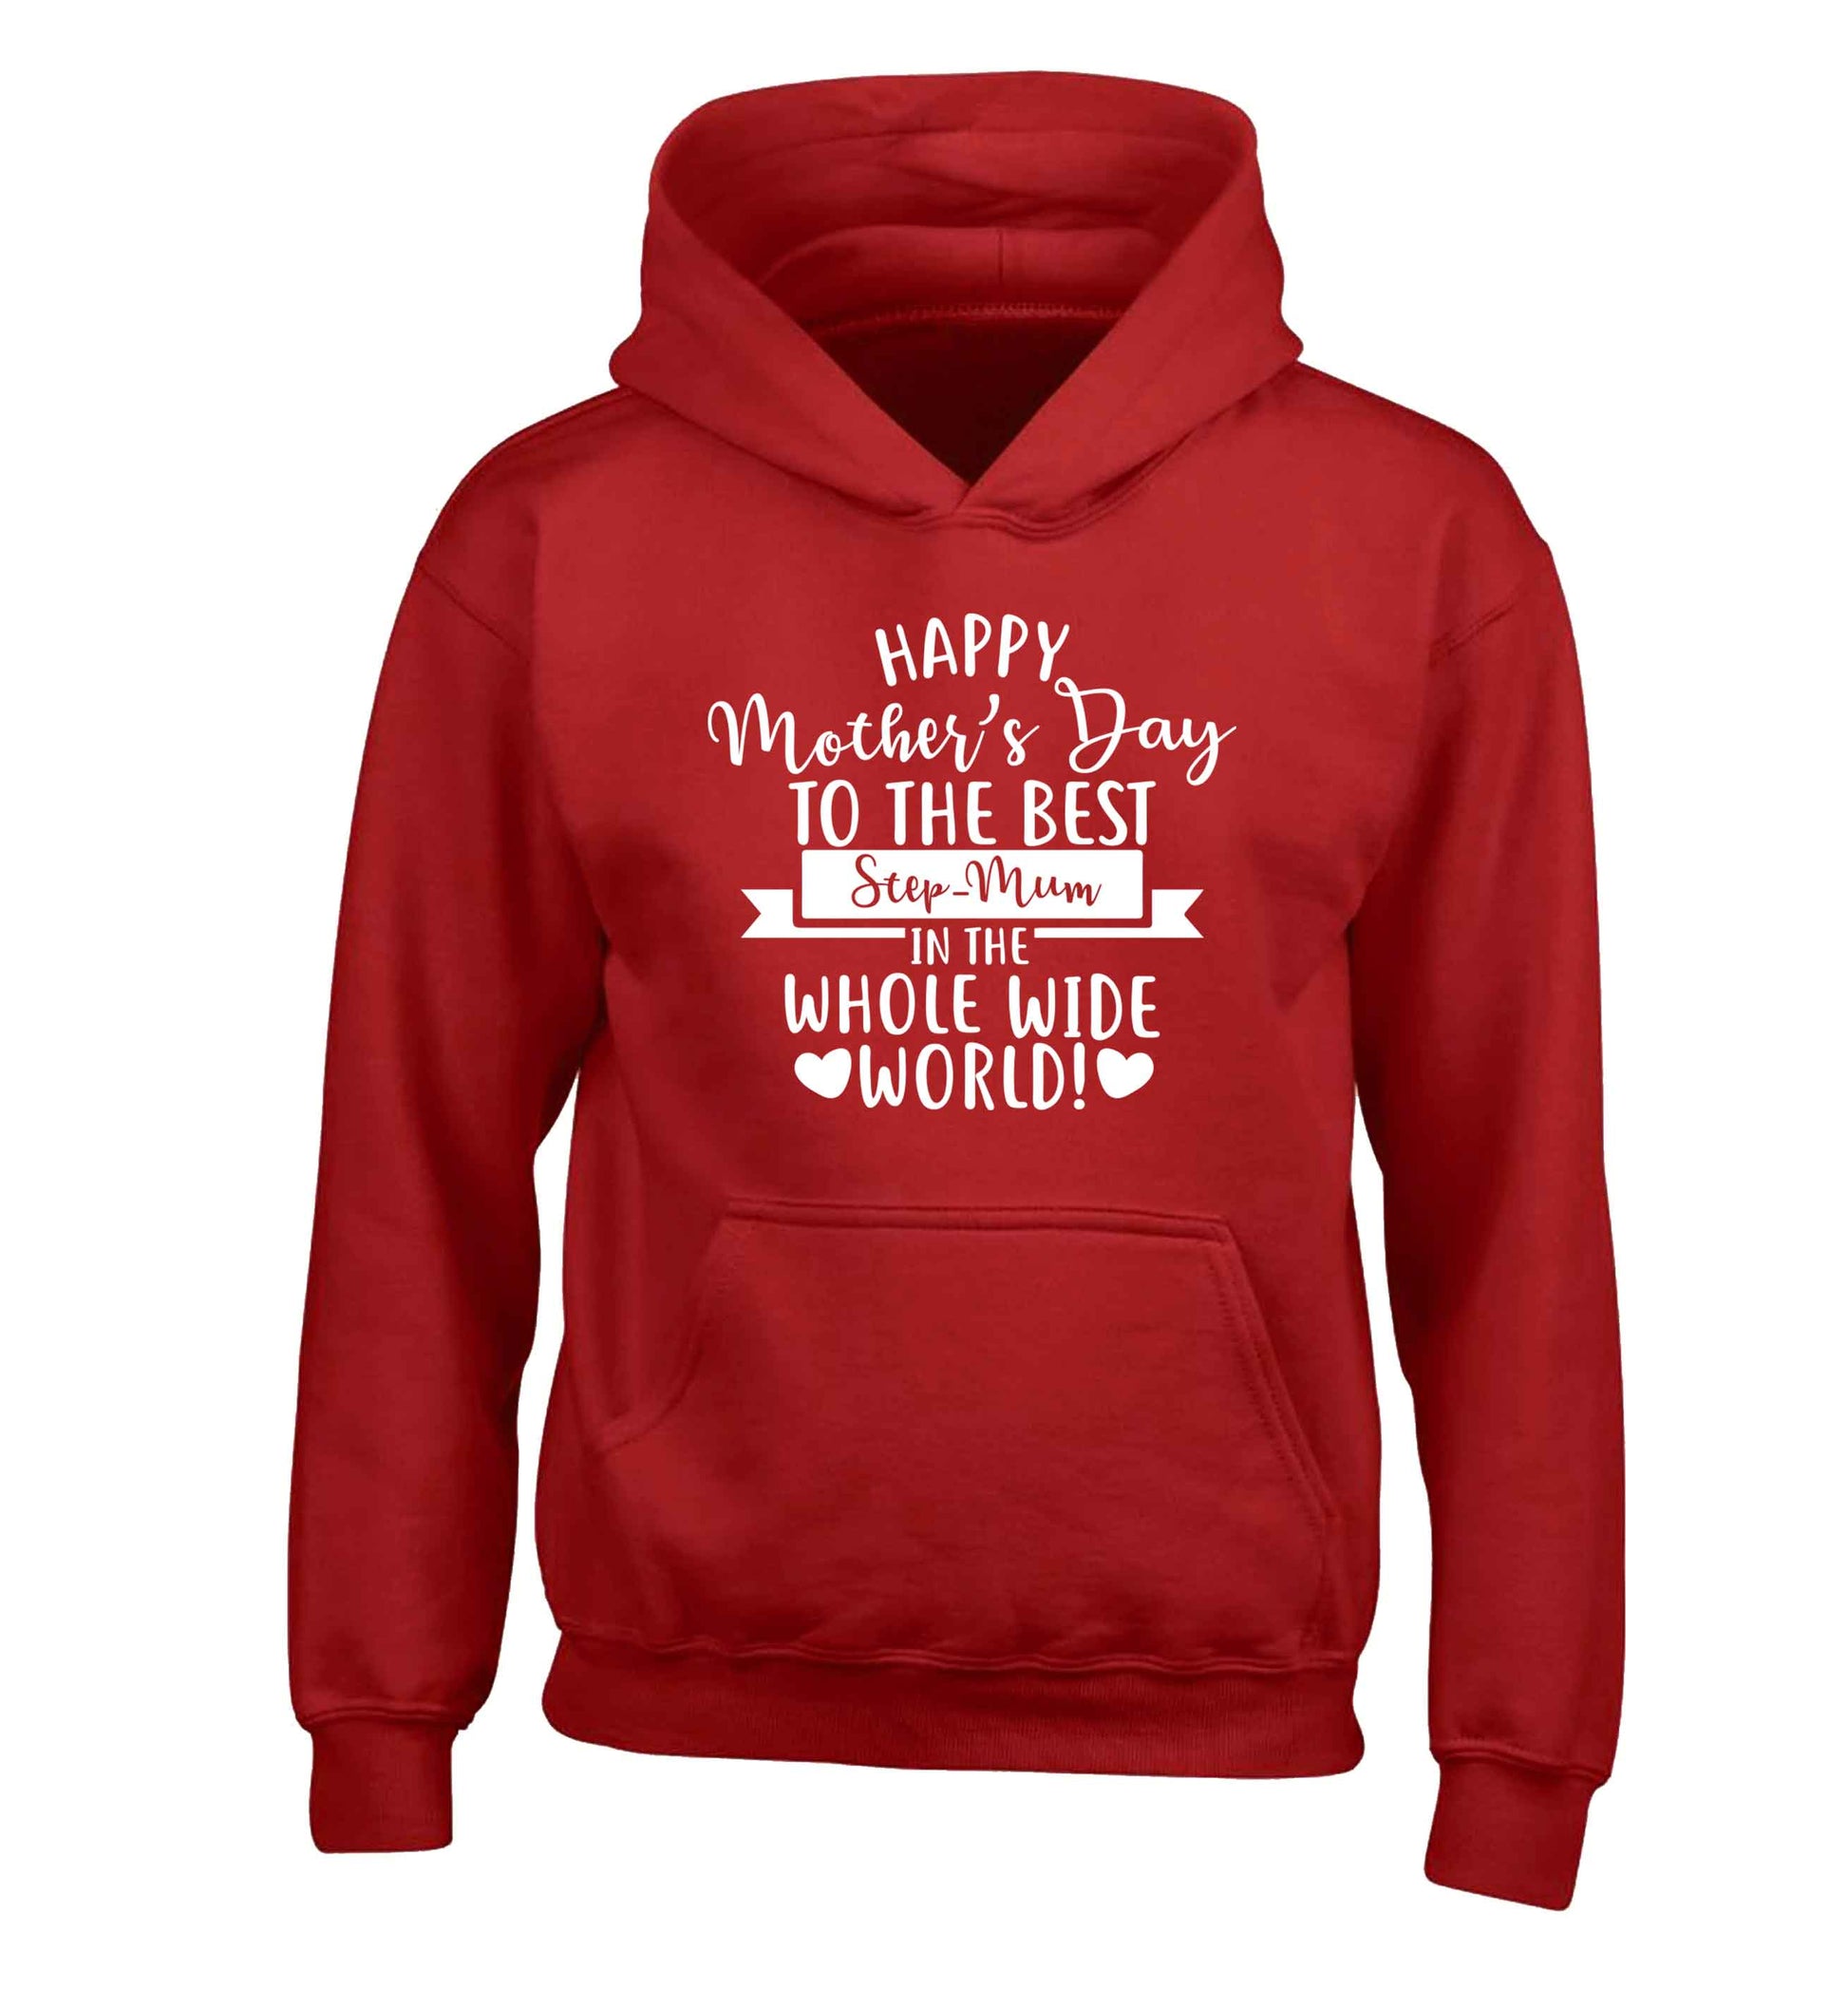 Happy mother's day to the best step-mum in the world children's red hoodie 12-13 Years